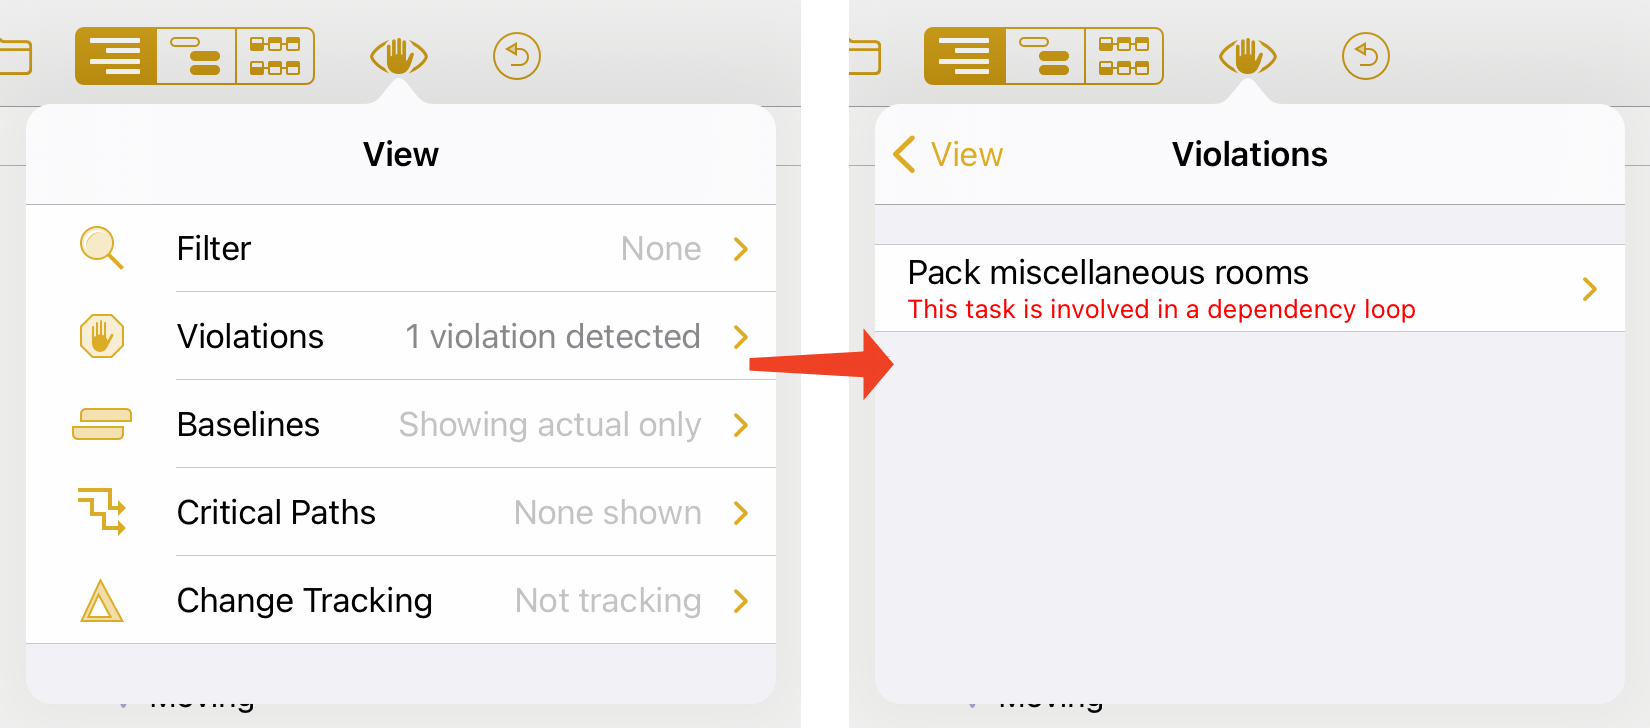 A violation appears in the View menu.